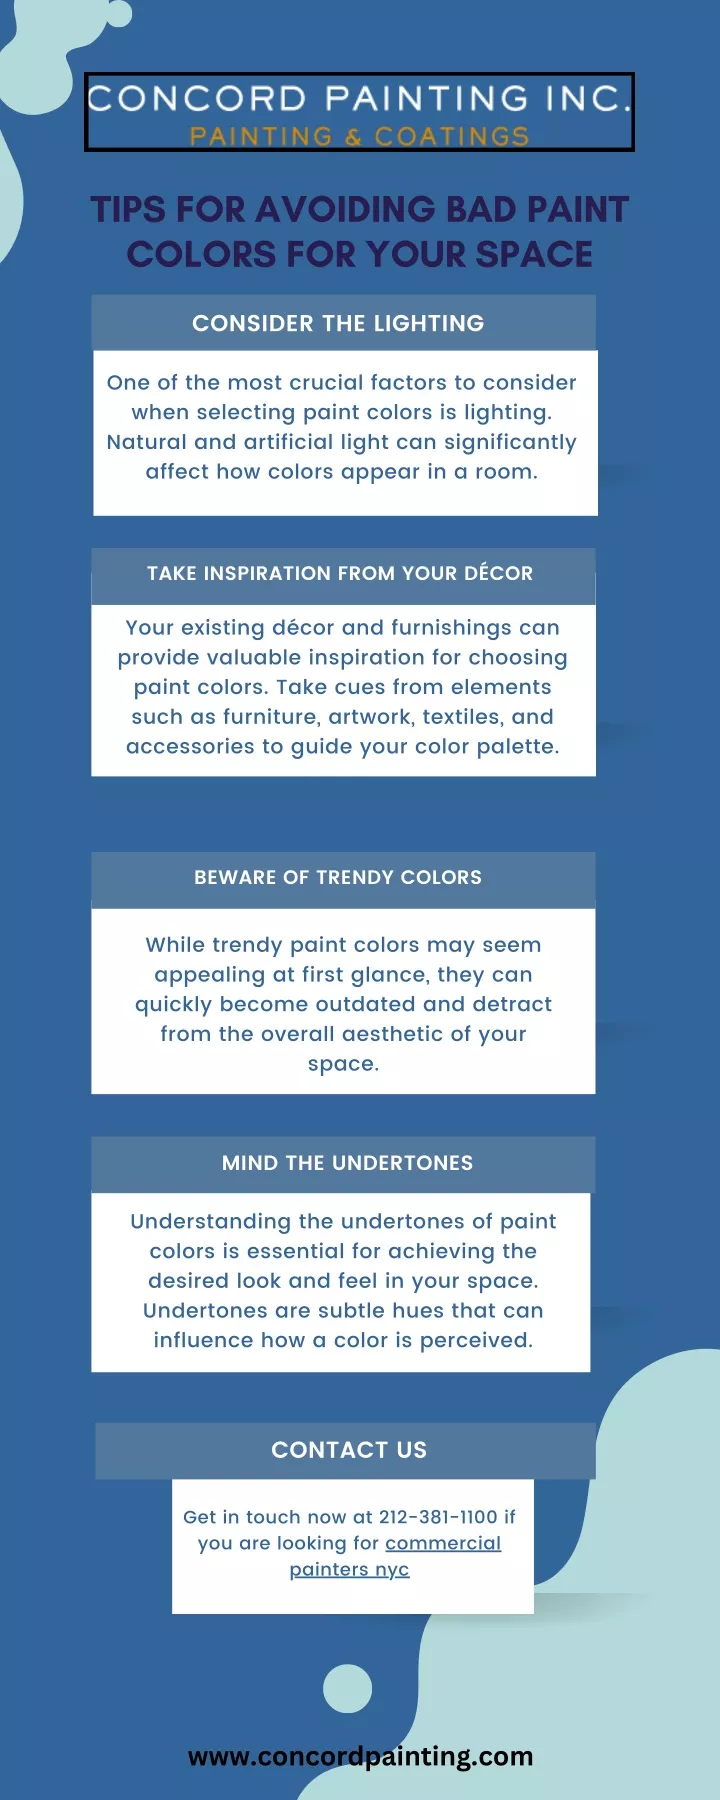 tips for avoiding bad paint colors for your space